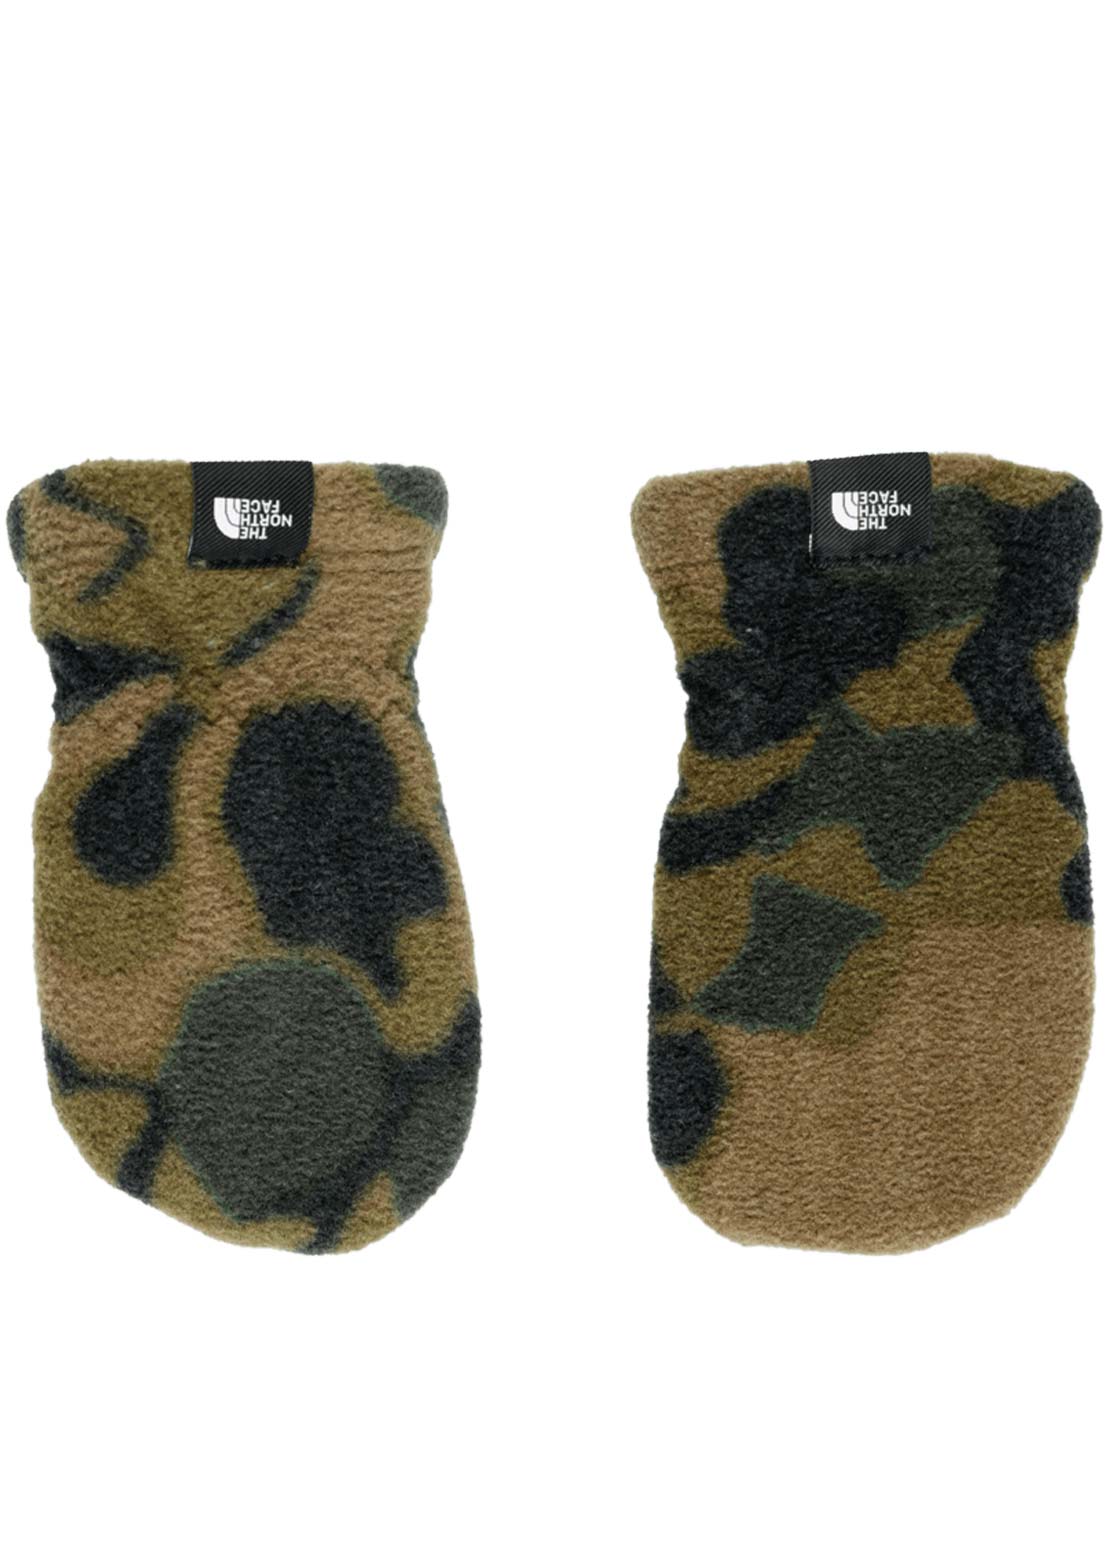 The North Face Infant Glacier Mitt Military Olive Camo Texture Small Print